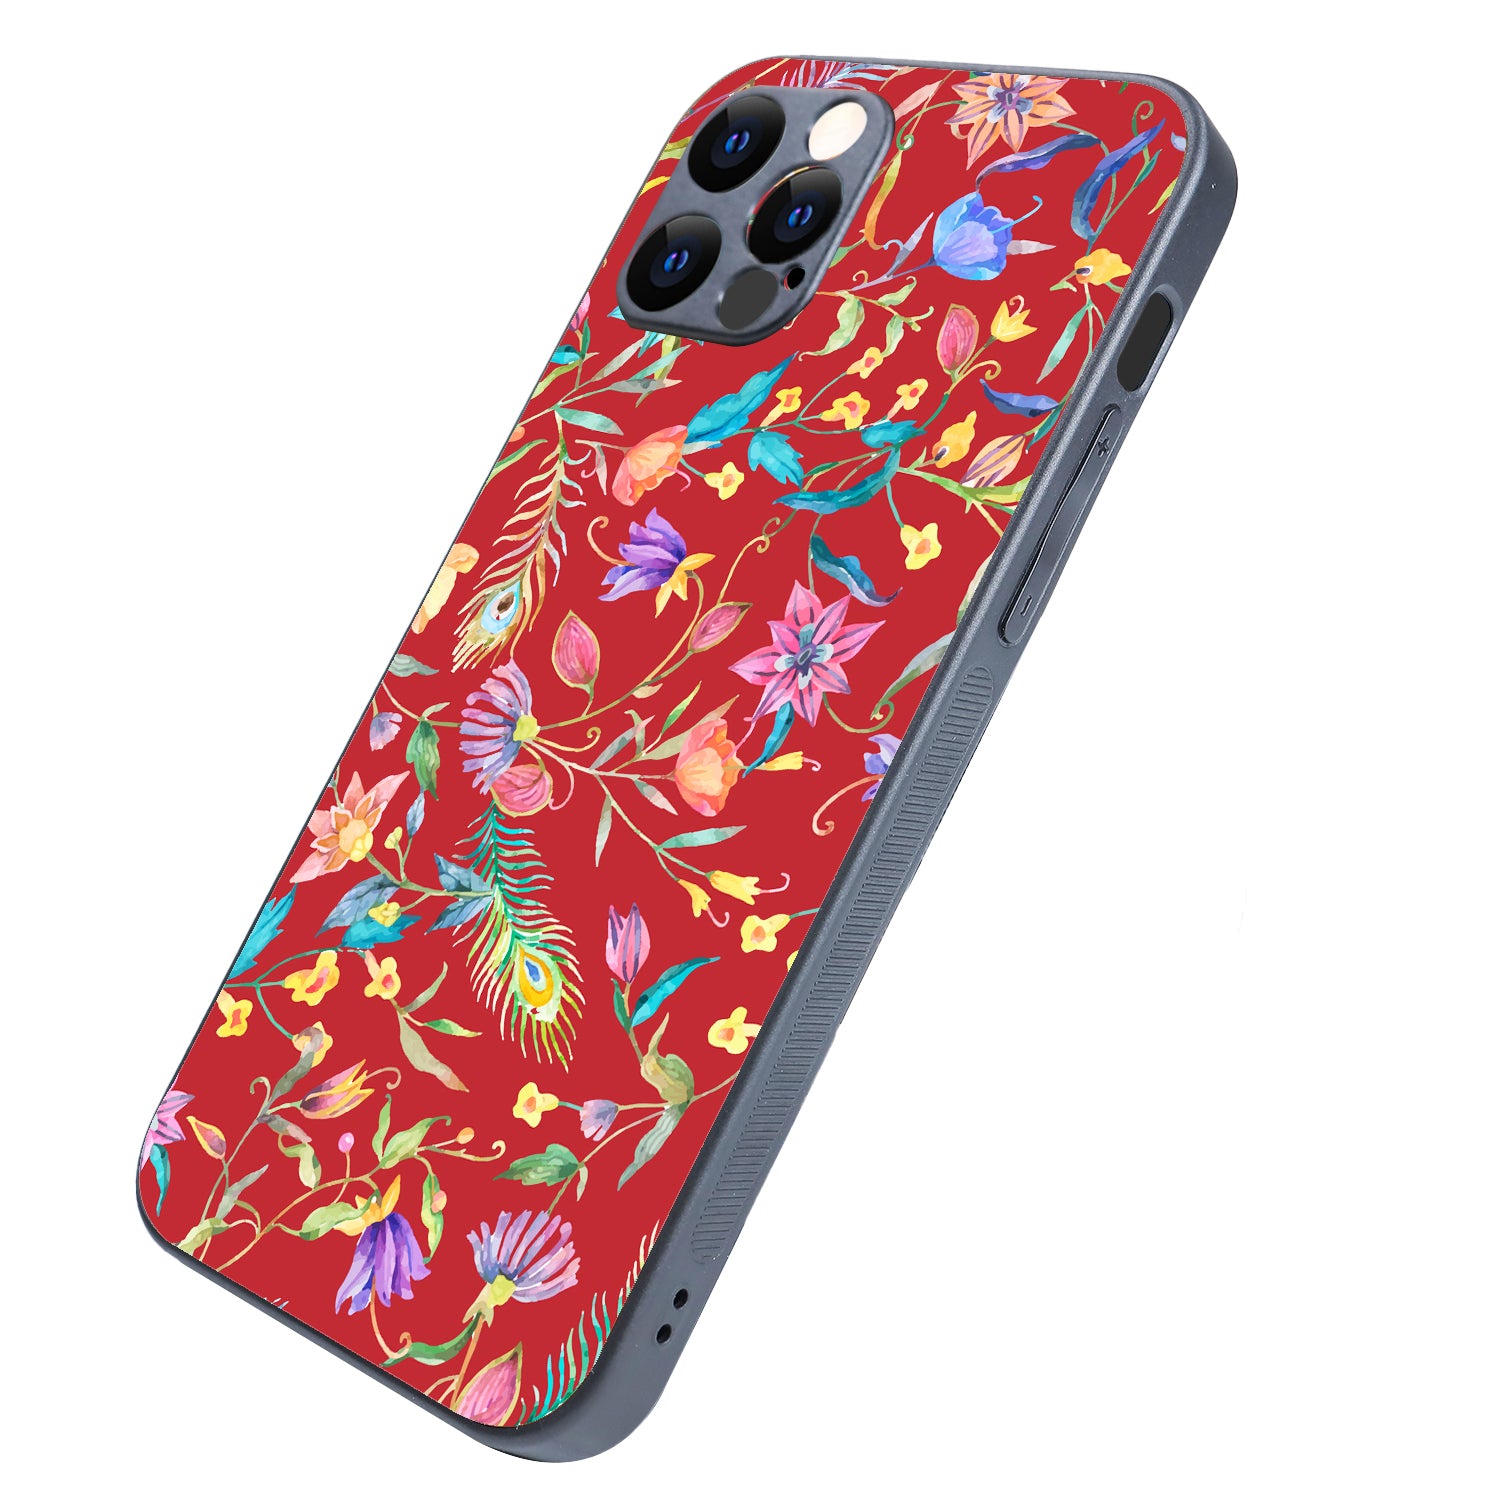 Red Doodle Floral iPhone 12 Pro Case